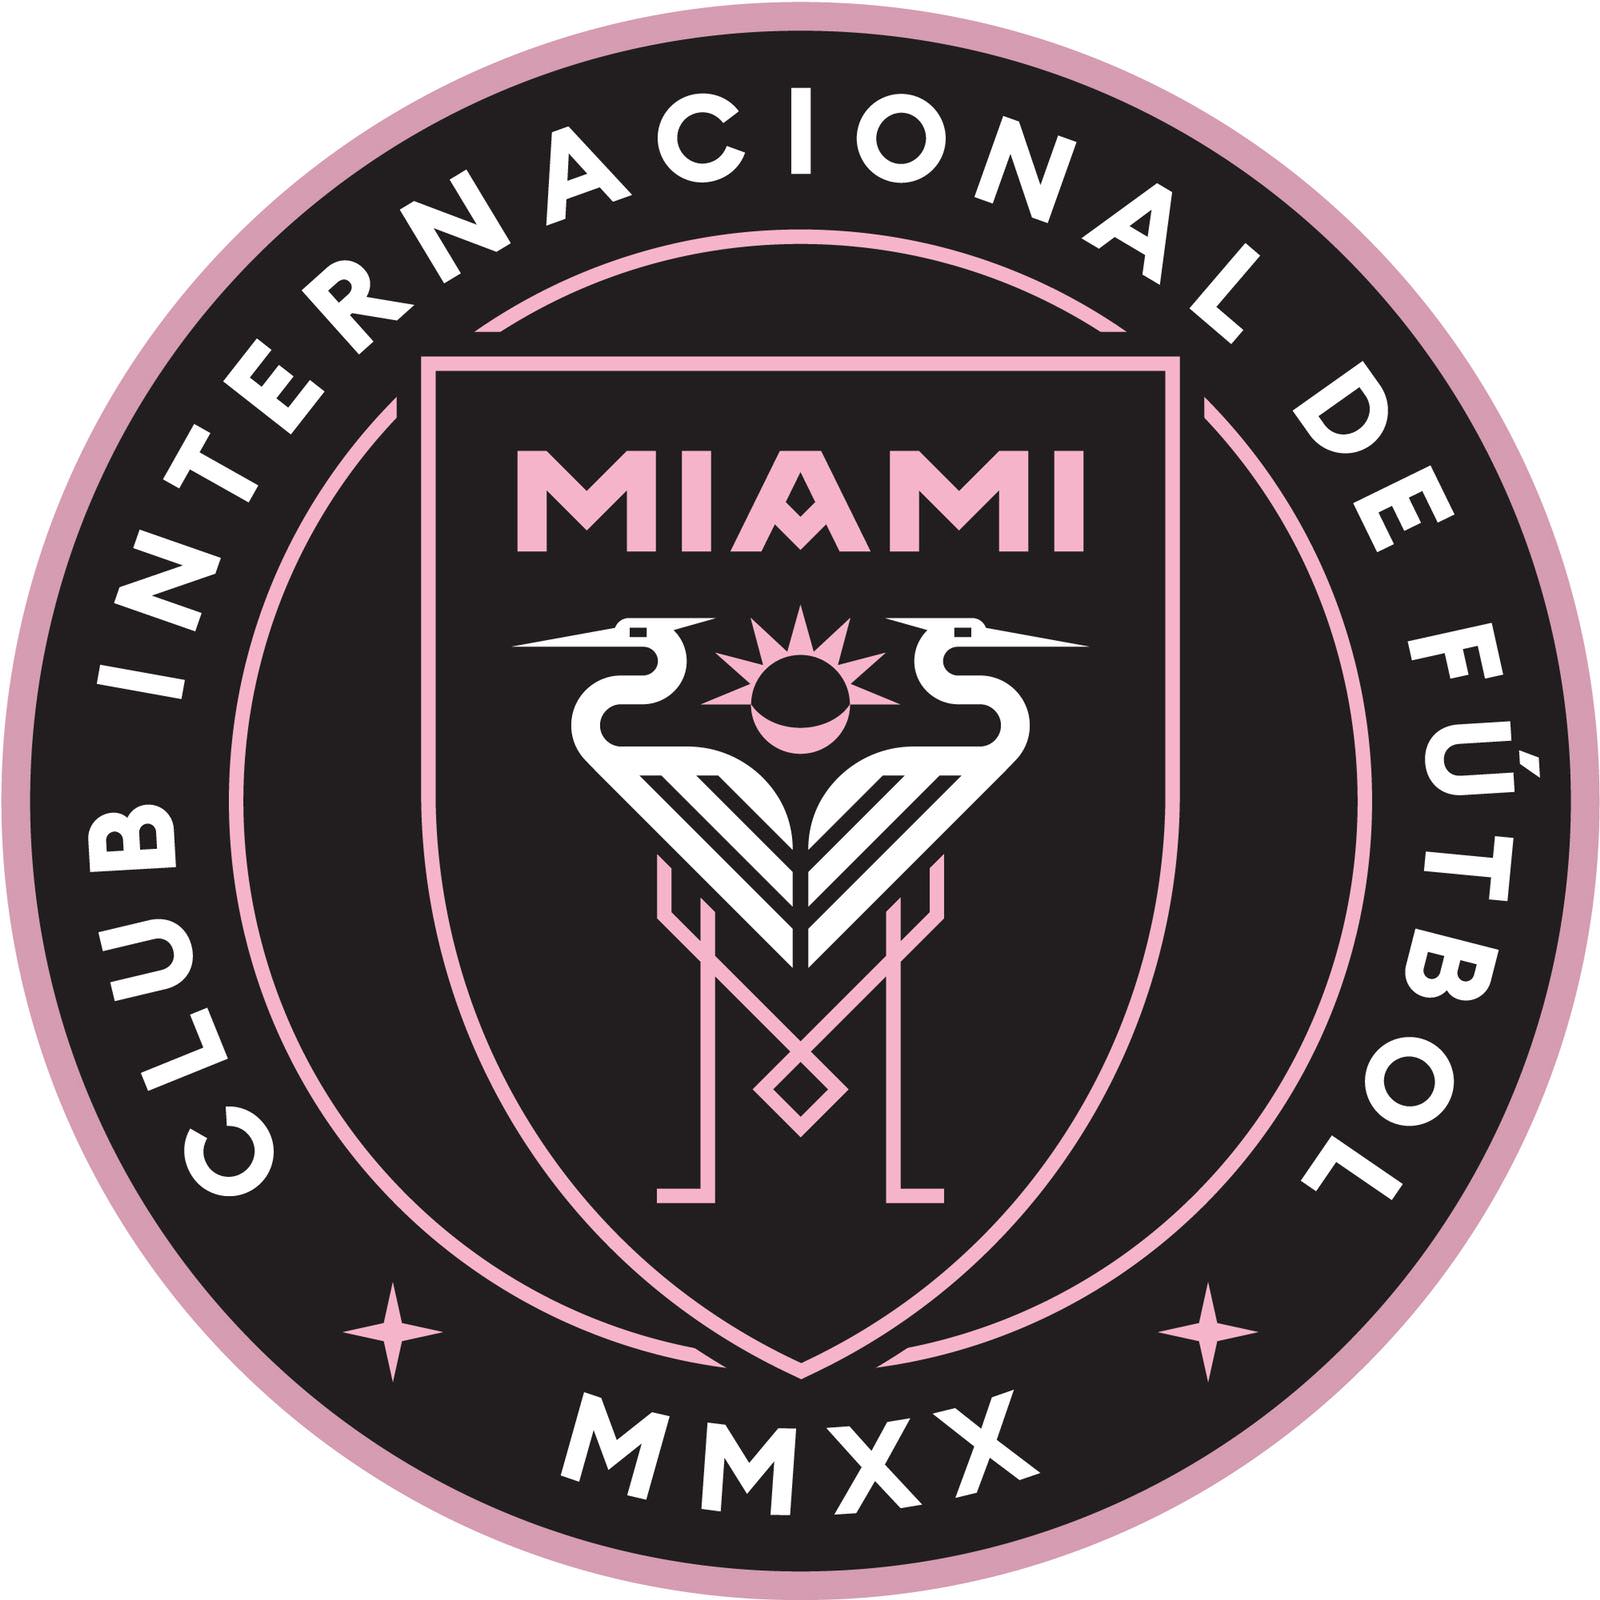 If anyone wants a Inter Miami phone wallpaper, here you go